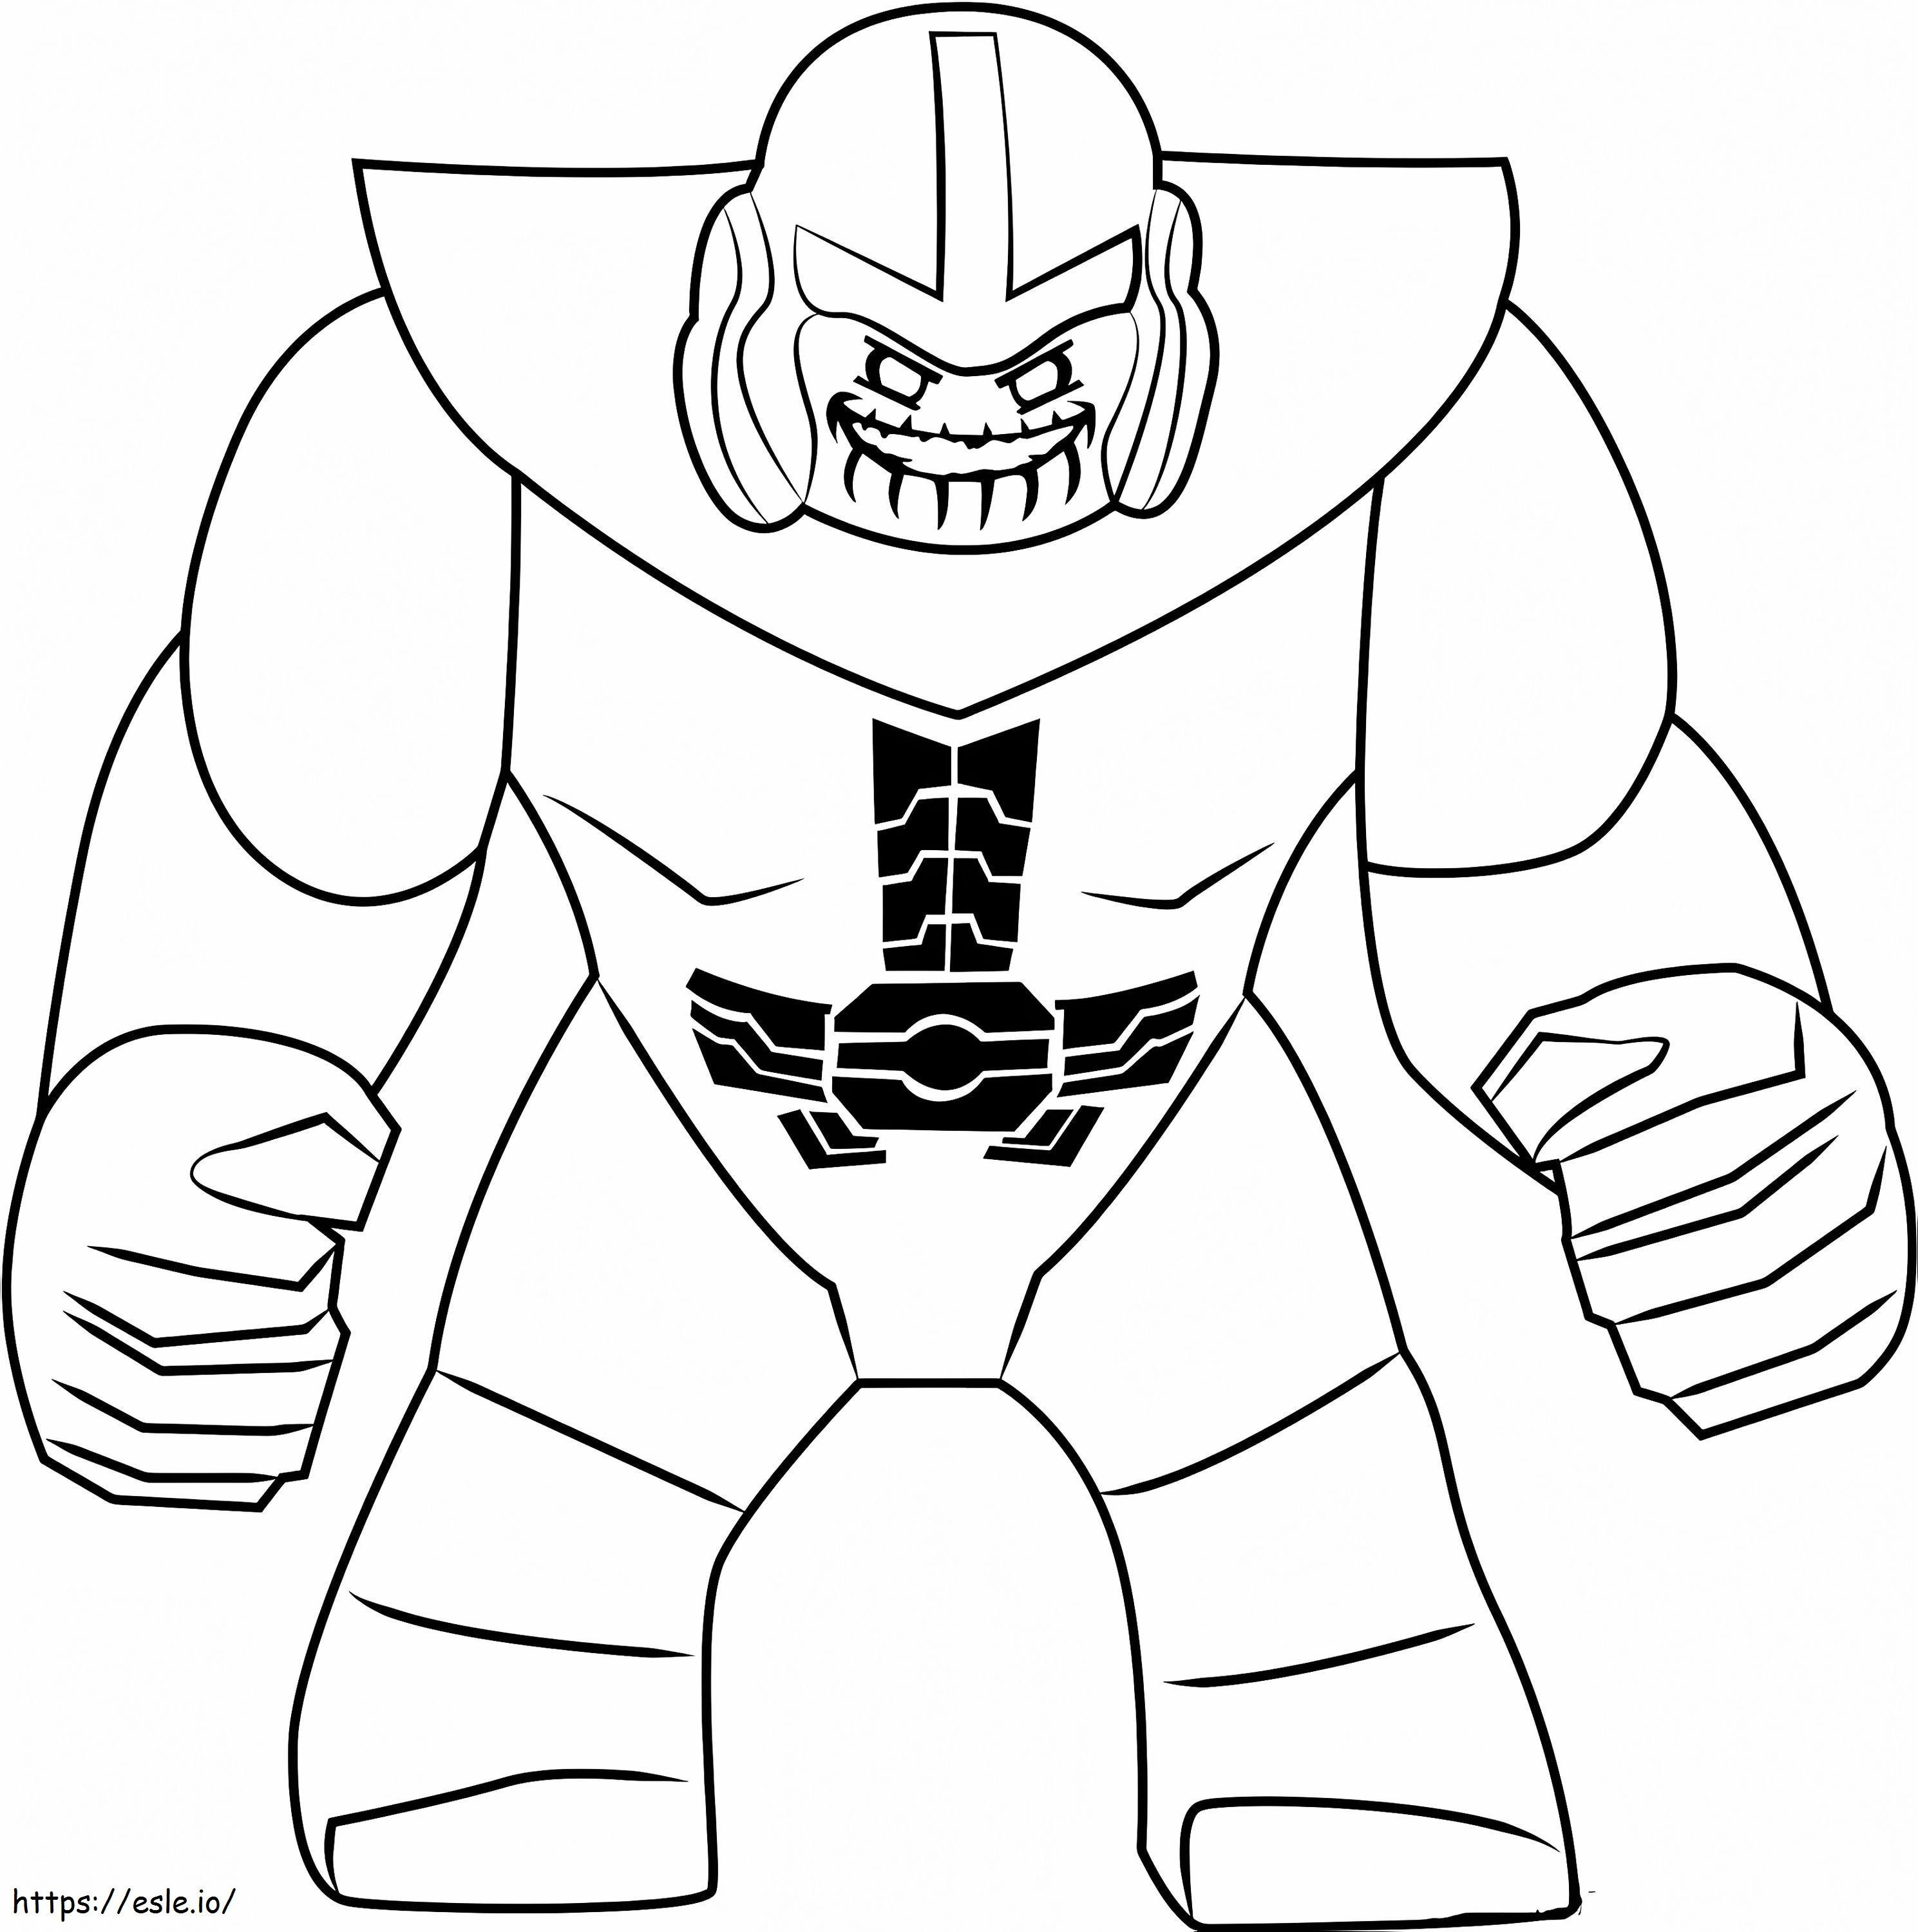 1547285152 Lego Thanos coloring page